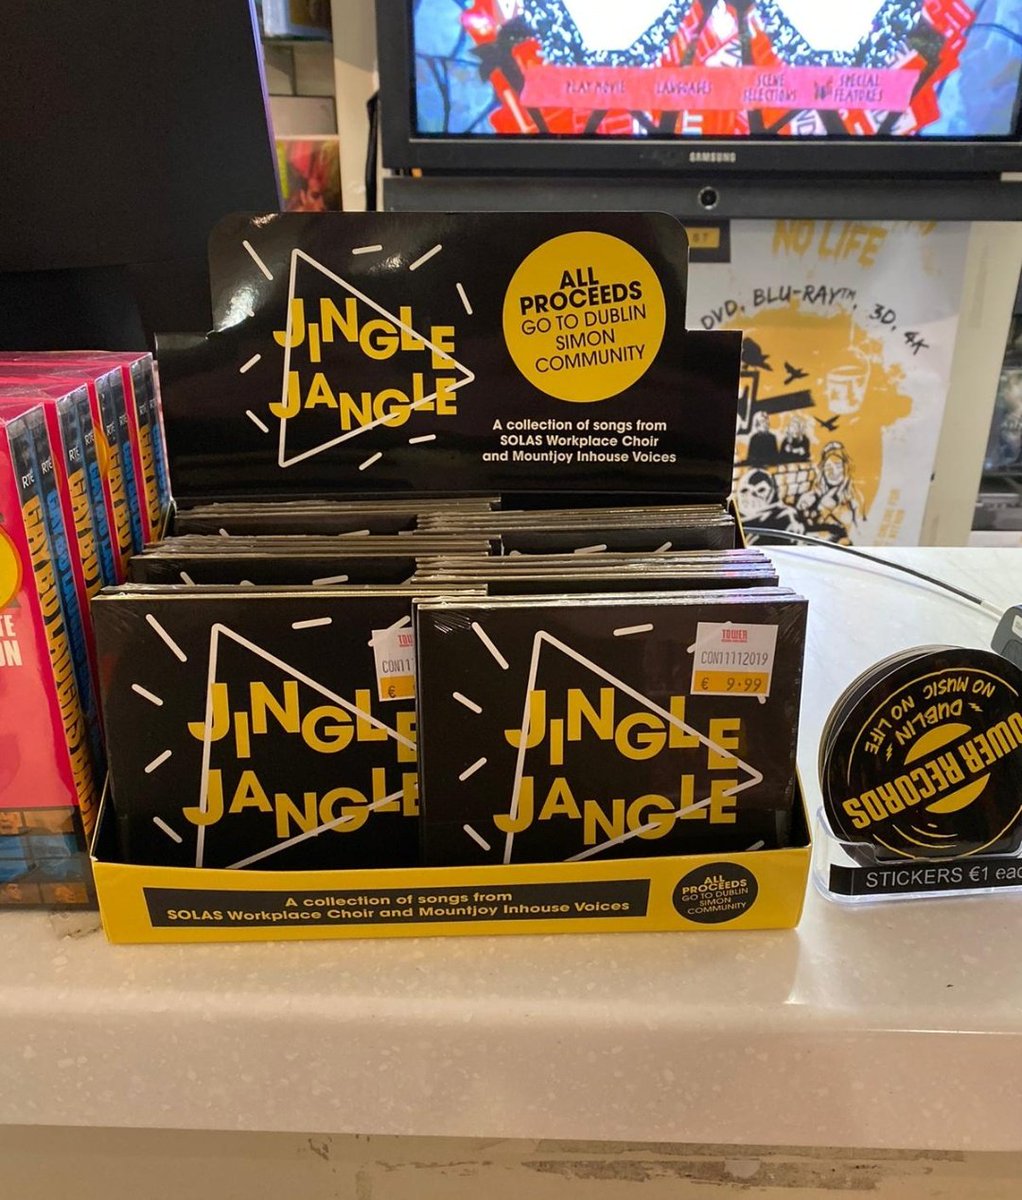 What an incredible feeling it was to see our album #JingleJangle (whaaaat!!!) in @TowerDublin grab one today in store or online towerrecords.ie/product/SOLASC… all proceeds will go to @Dublin_Simon #charityalbum #dublinsimoncommunity